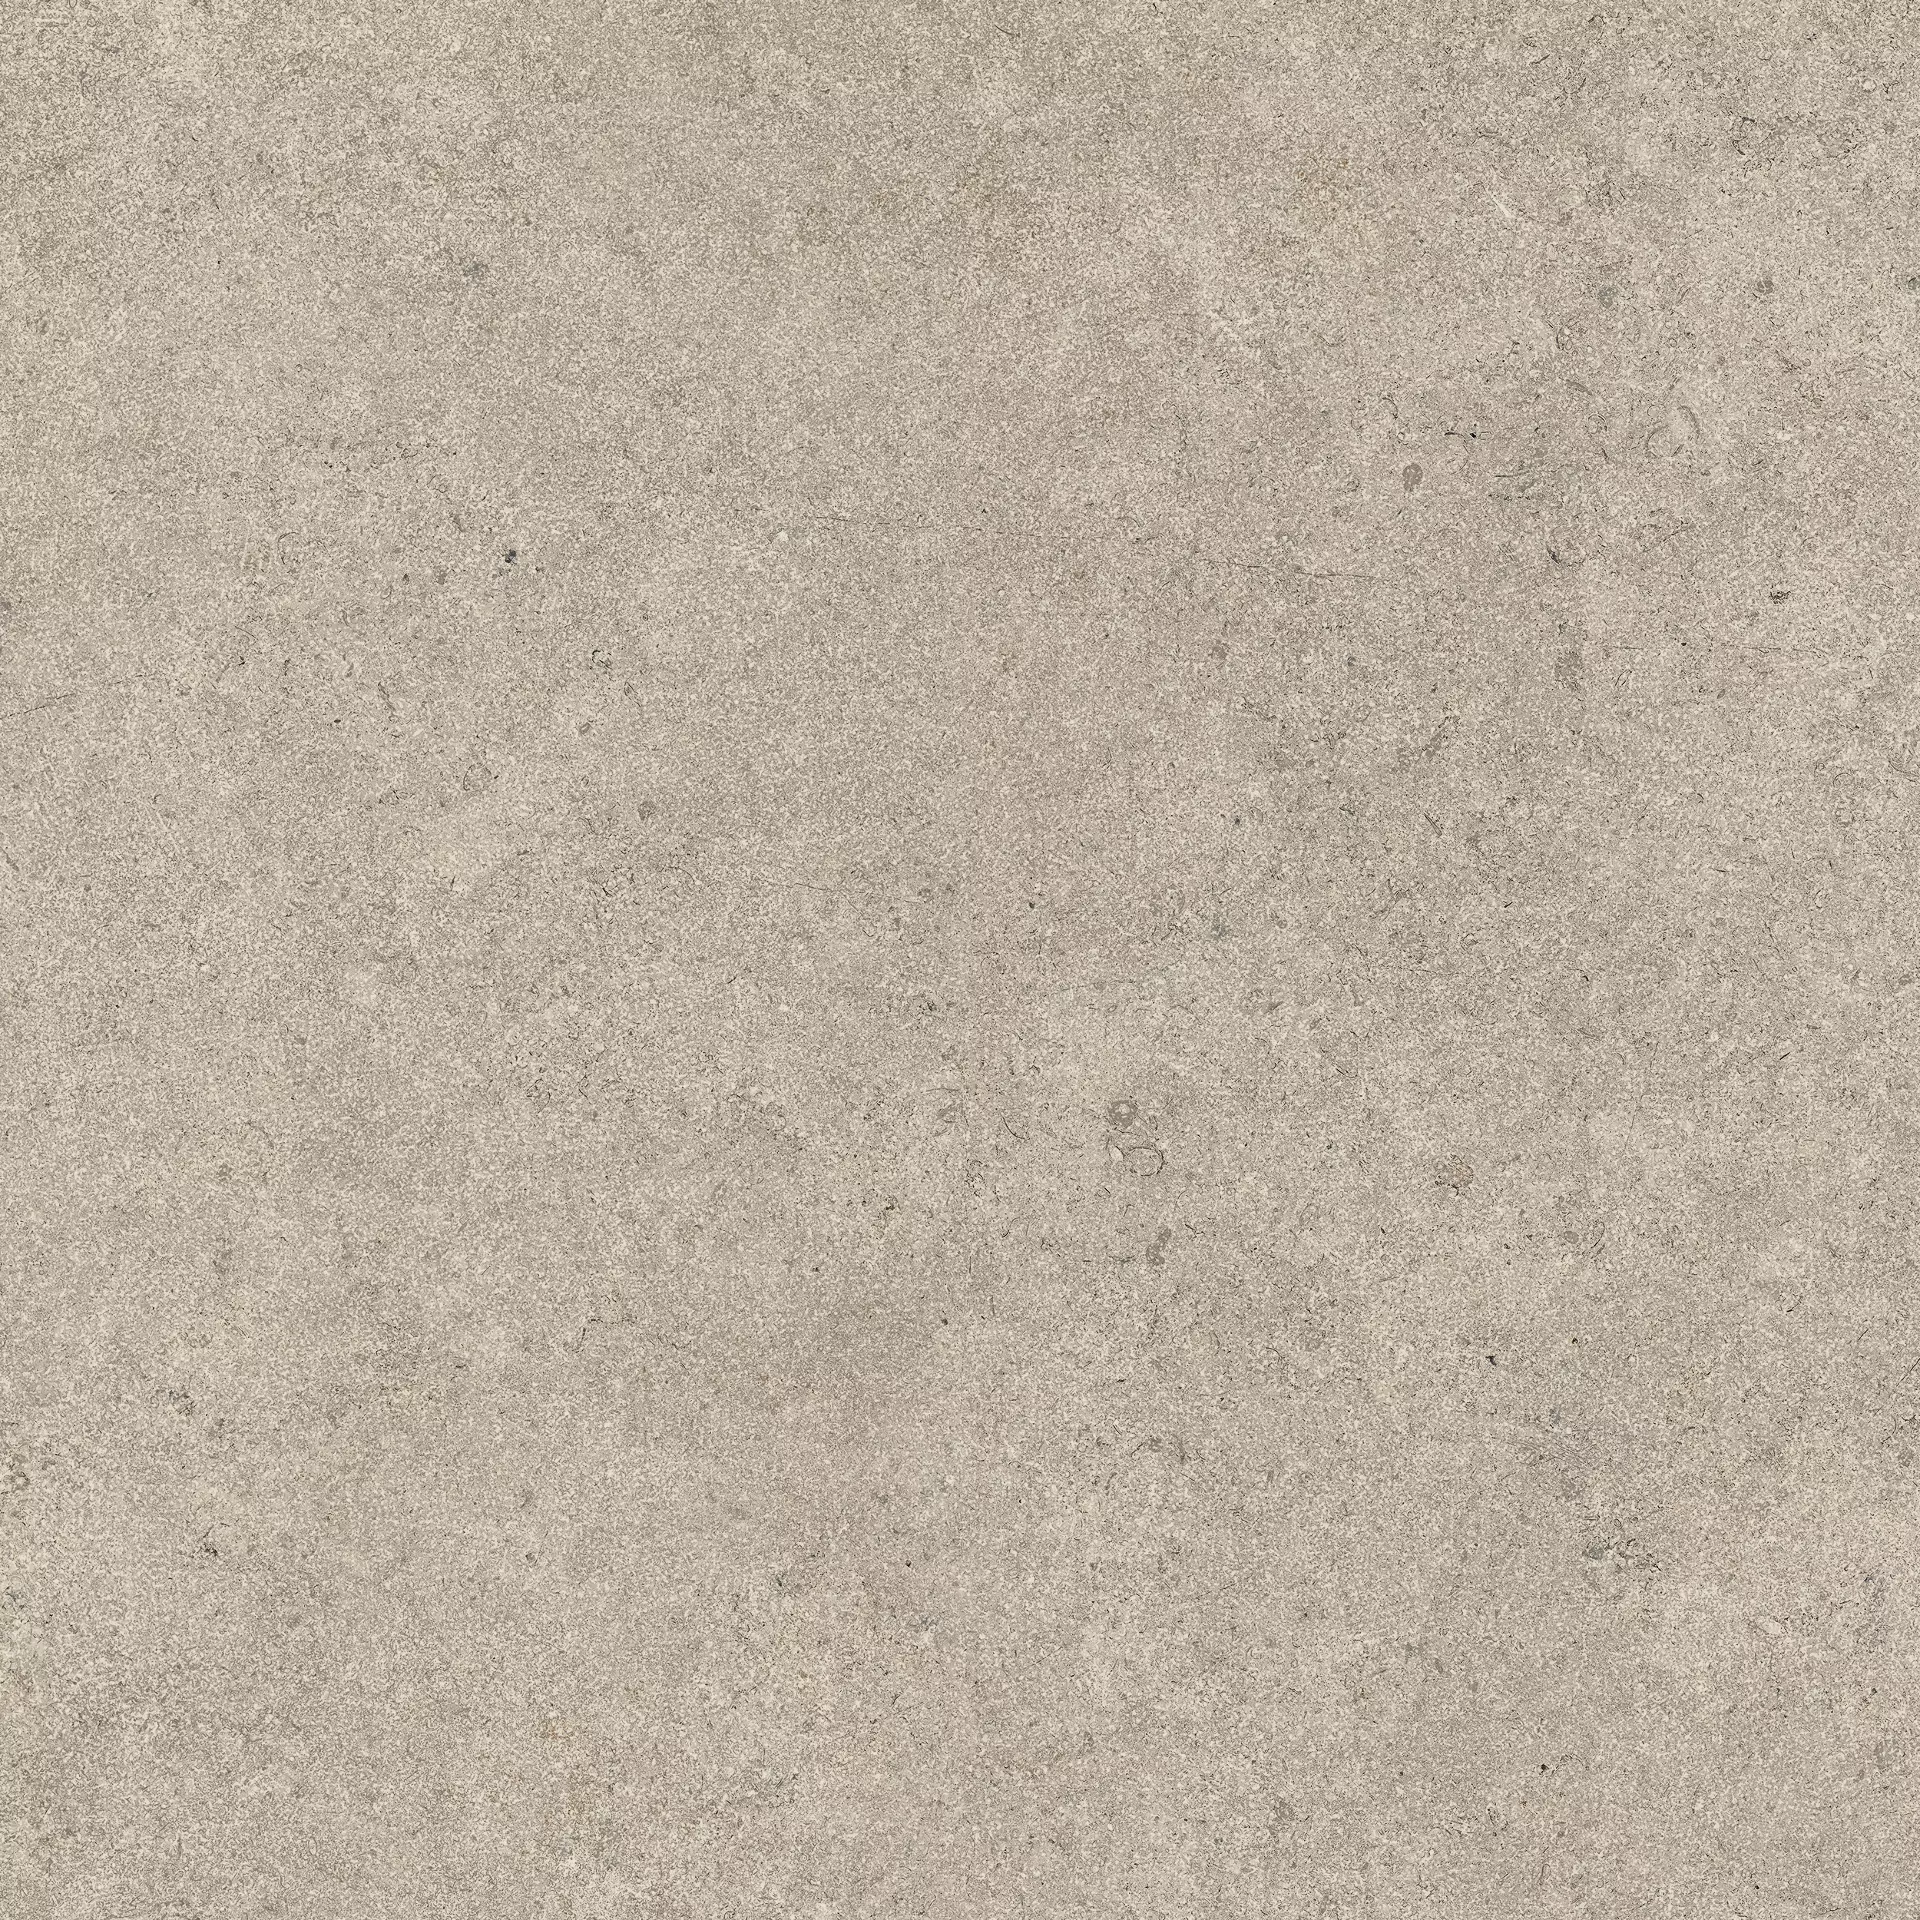 Cottodeste Pura Sand Rolled Protect EGWPR35 60x60cm rectified 14mm